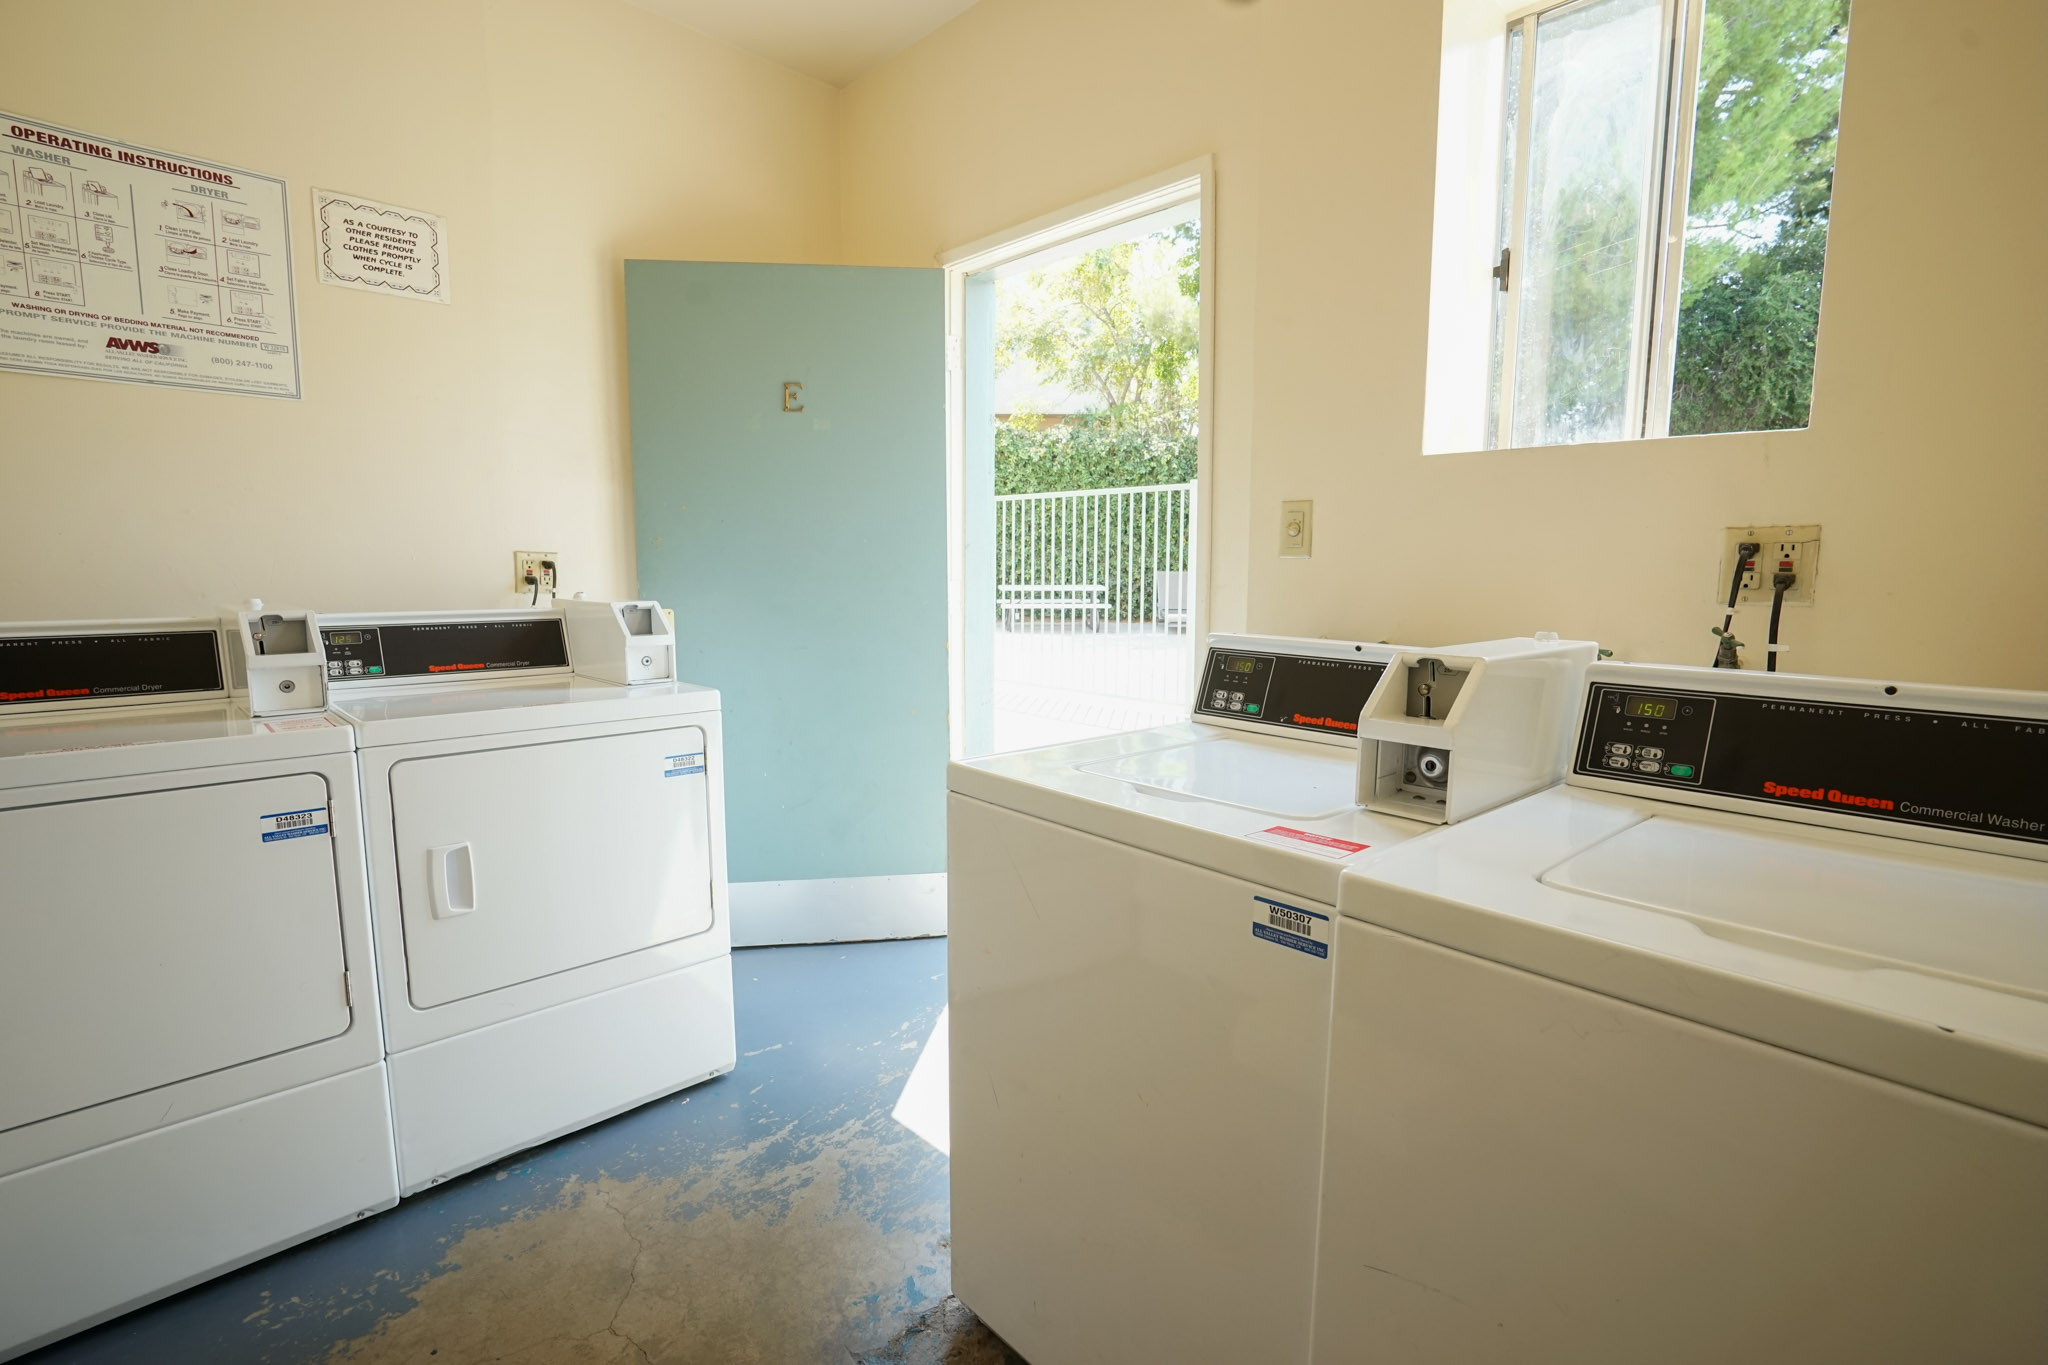 Laundry room with four machines visible. There is an operating instruction sign posted on the wall, and a sliding window.